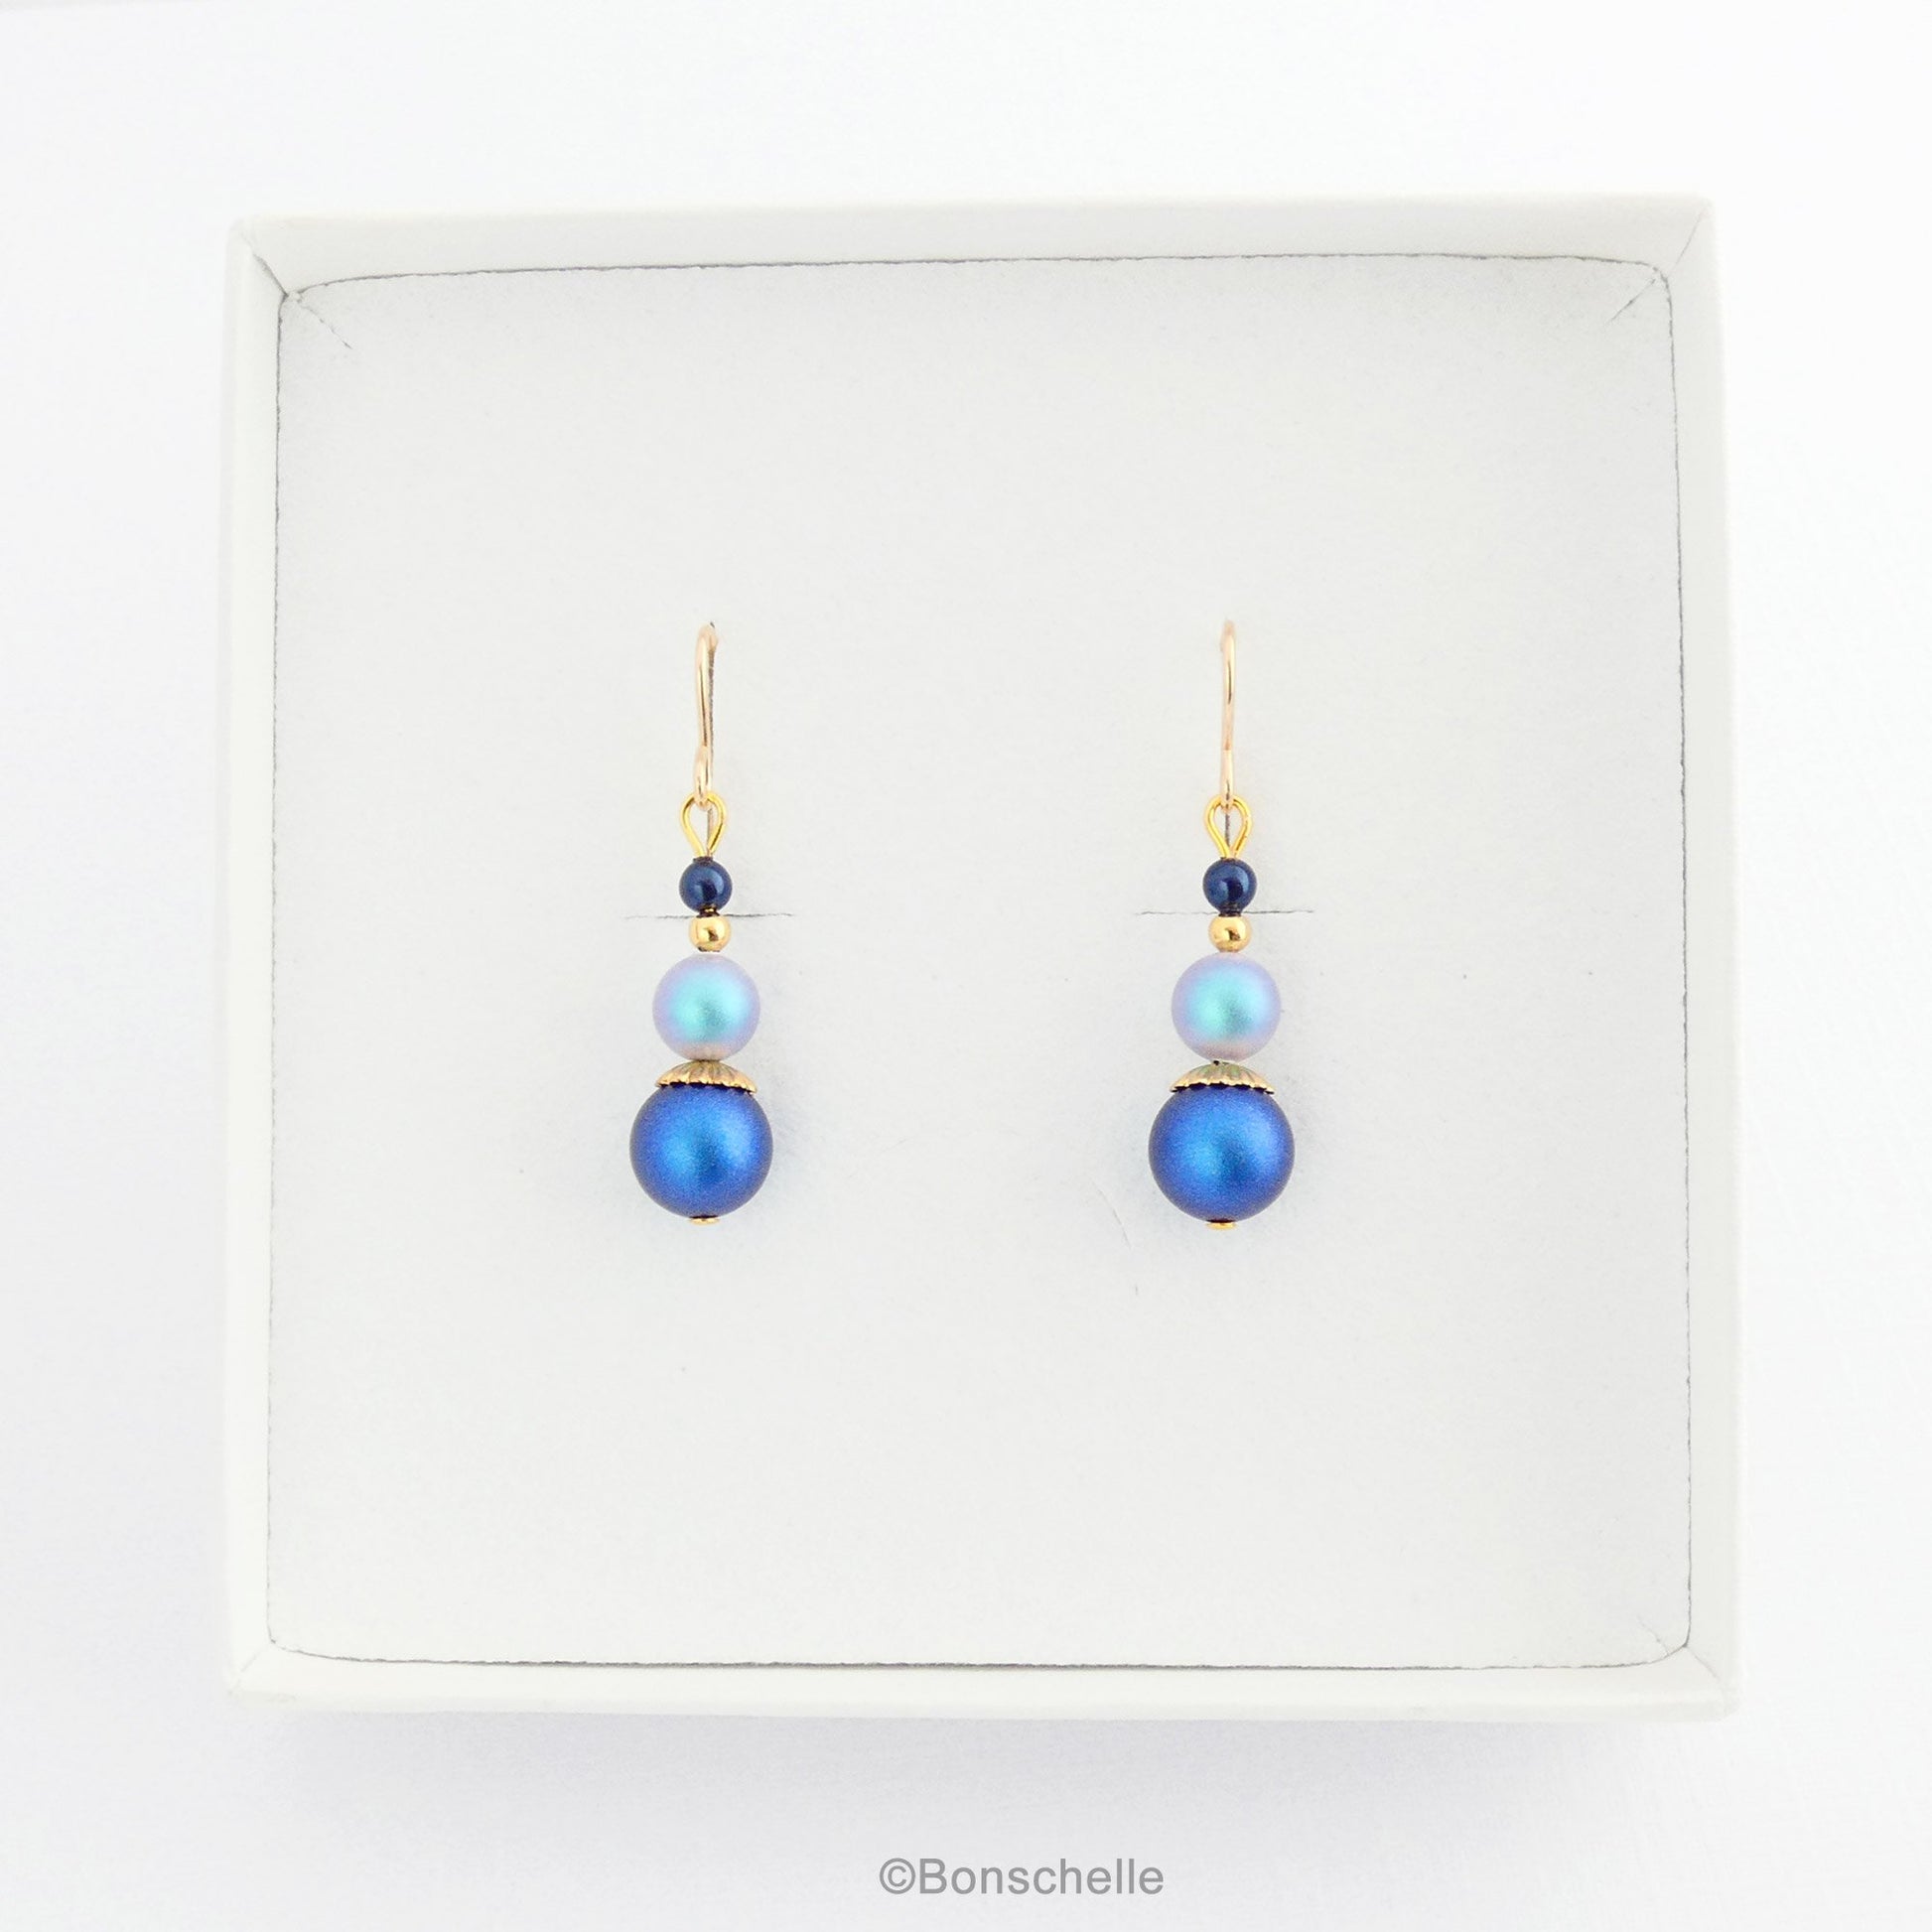 Blue swarovski crystal pearl beaded drop earrings with 14K gold filled earwires for women with gold accents shown in a jewellery box